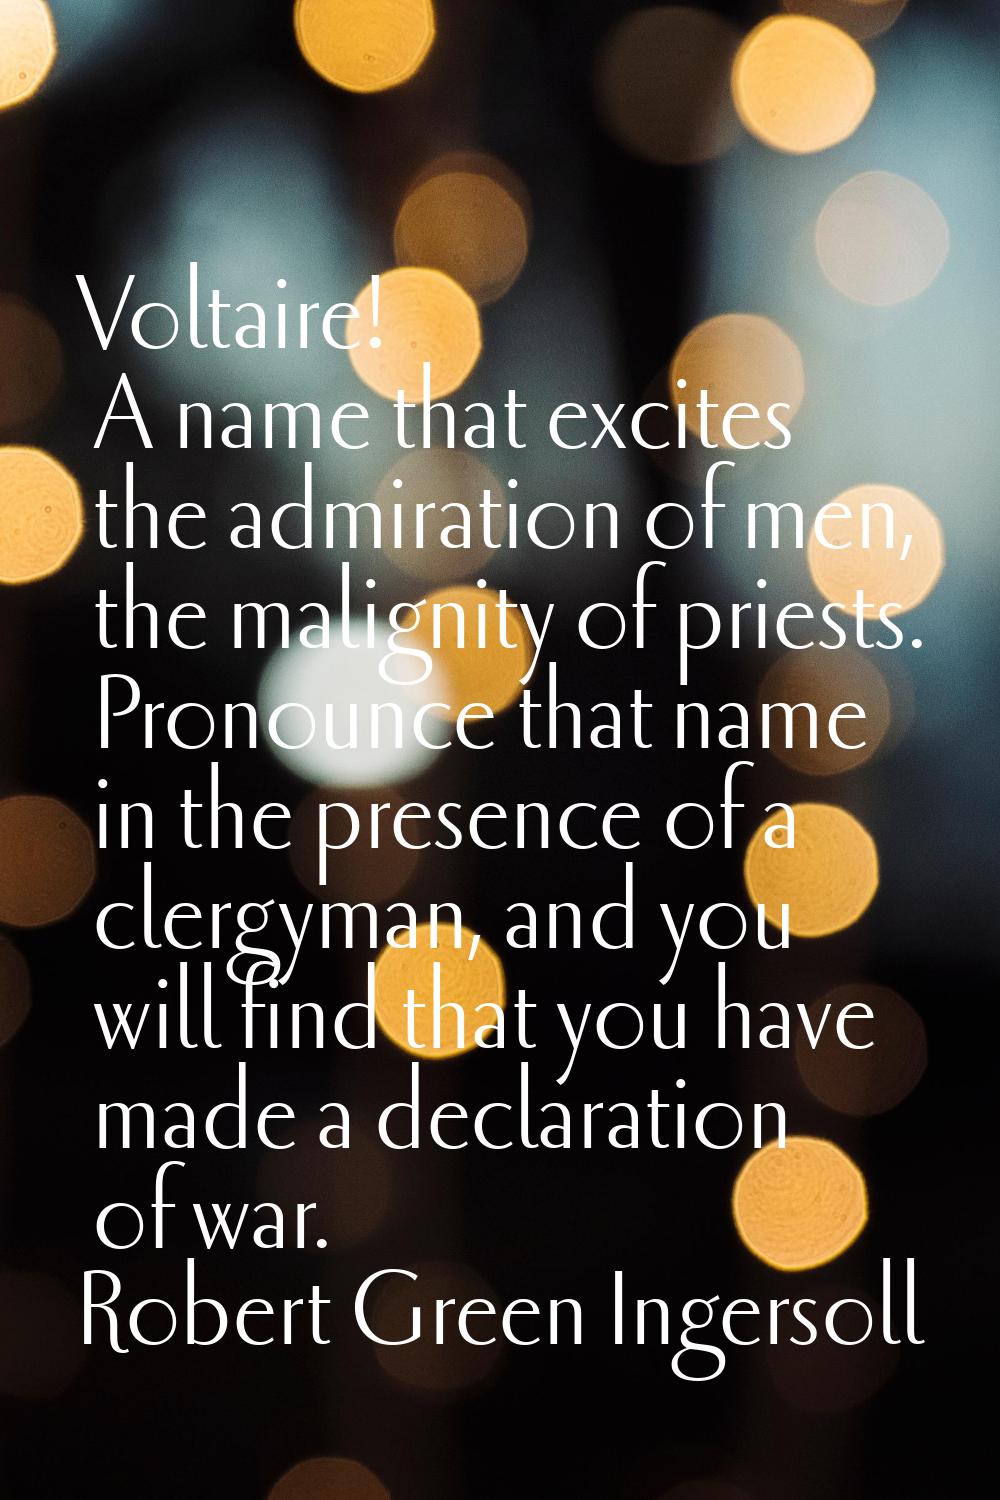 Voltaire! A name that excites the admiration of men, the malignity of priests. Pronounce that name 